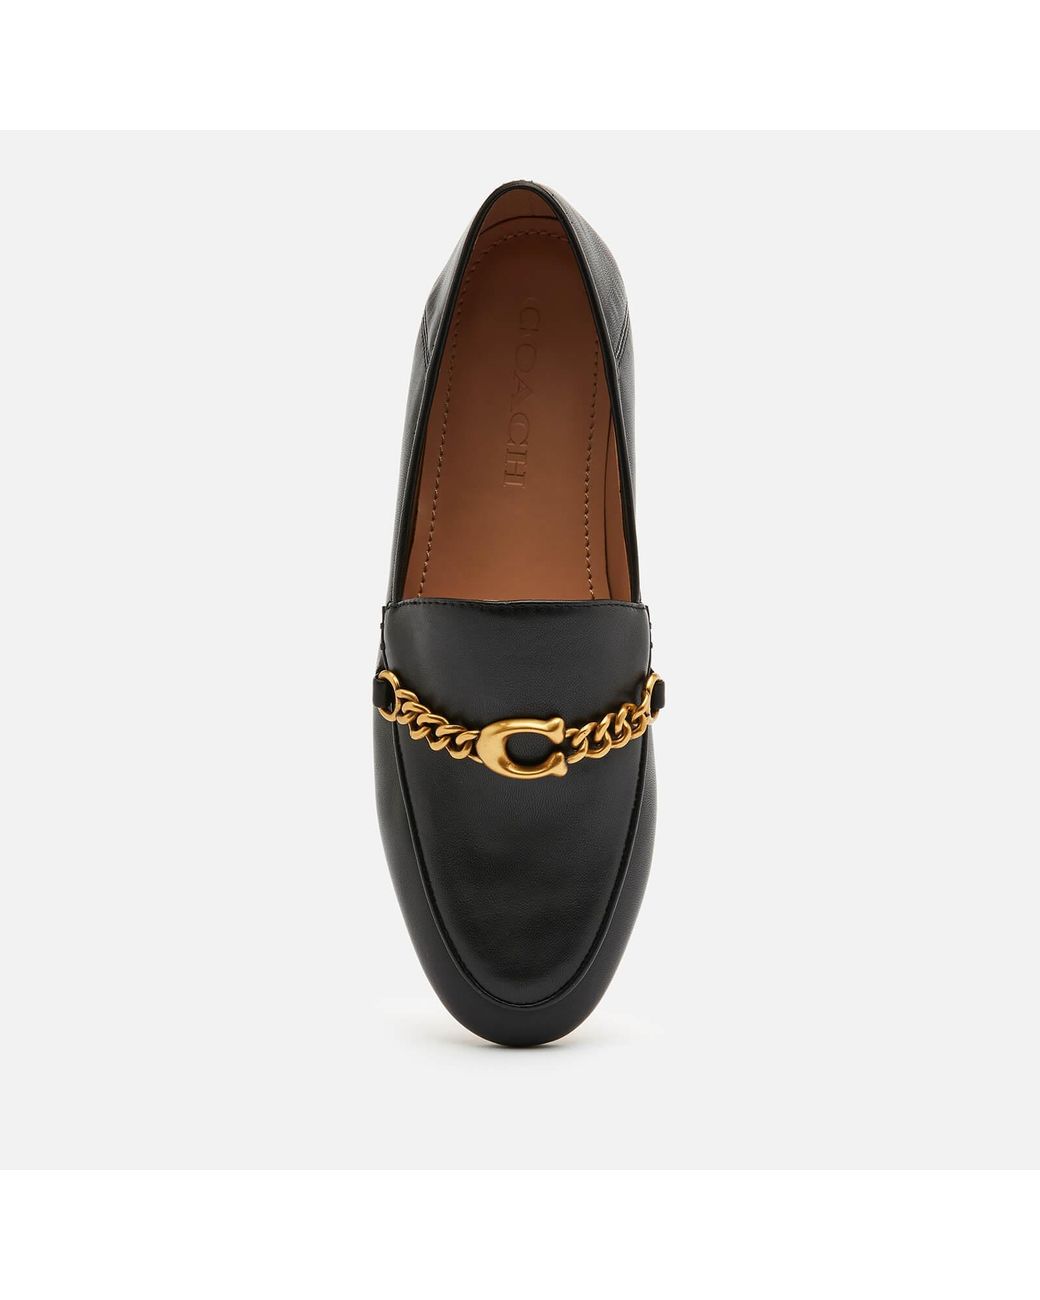 COACH Helena C Chain Leather Loafers in Black - Lyst